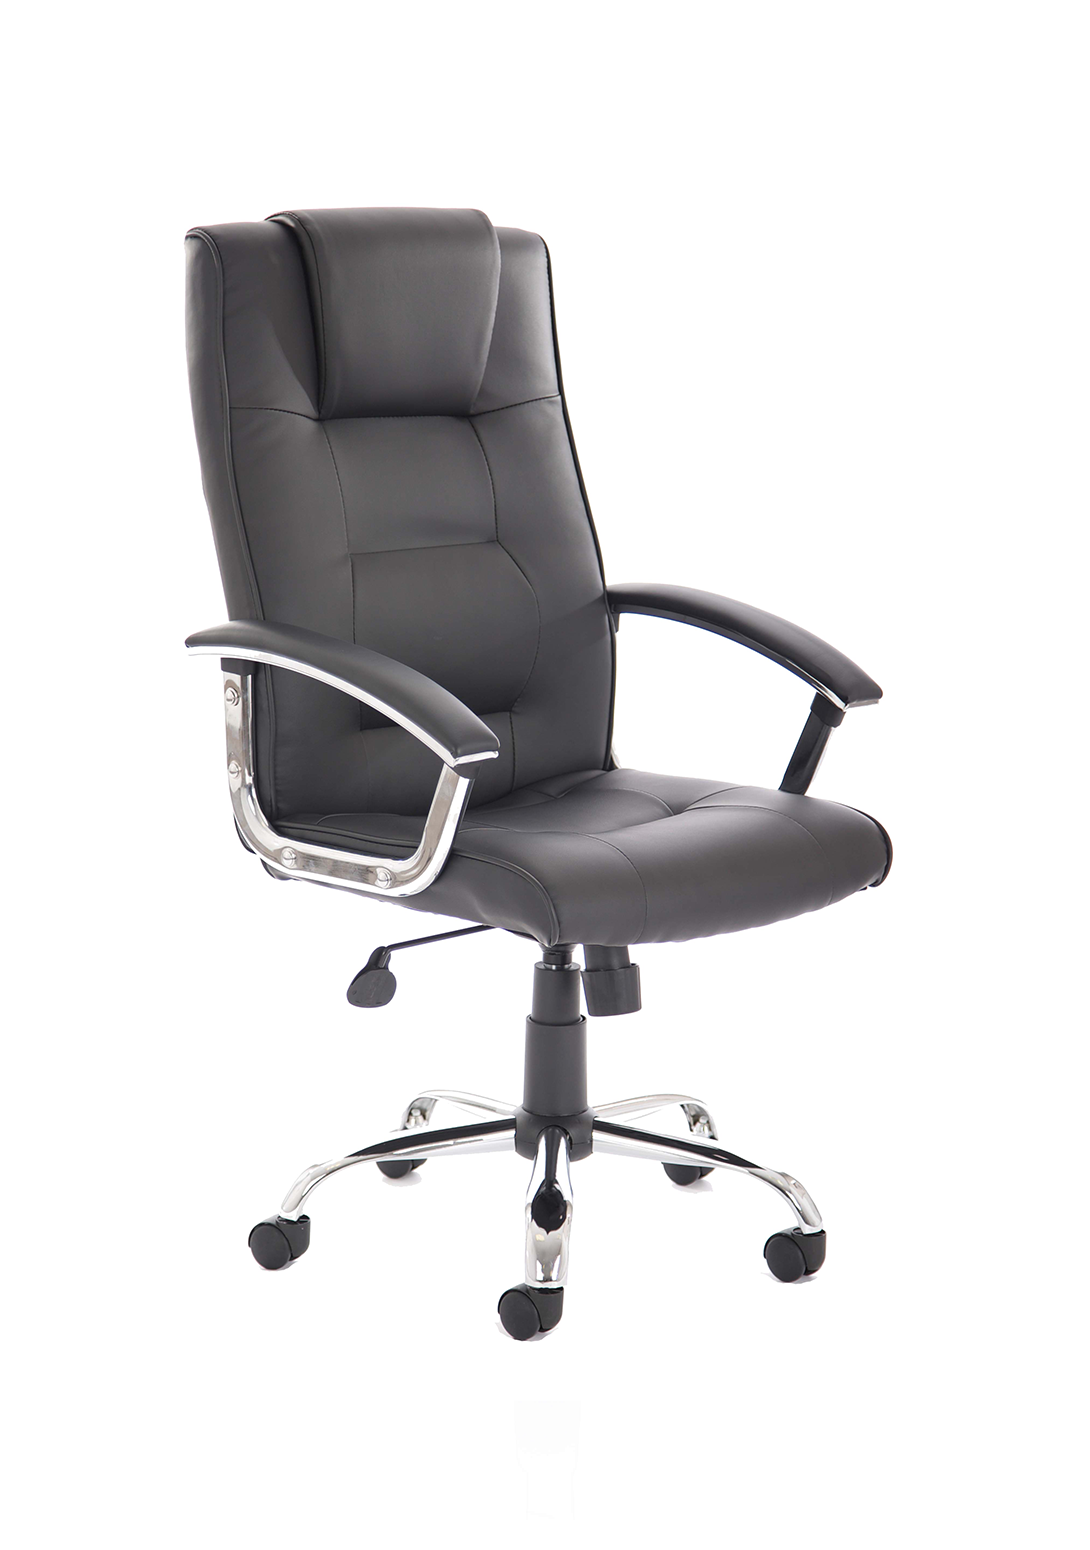 Thrift High Back Executive Black Leather Office Chair with Arms